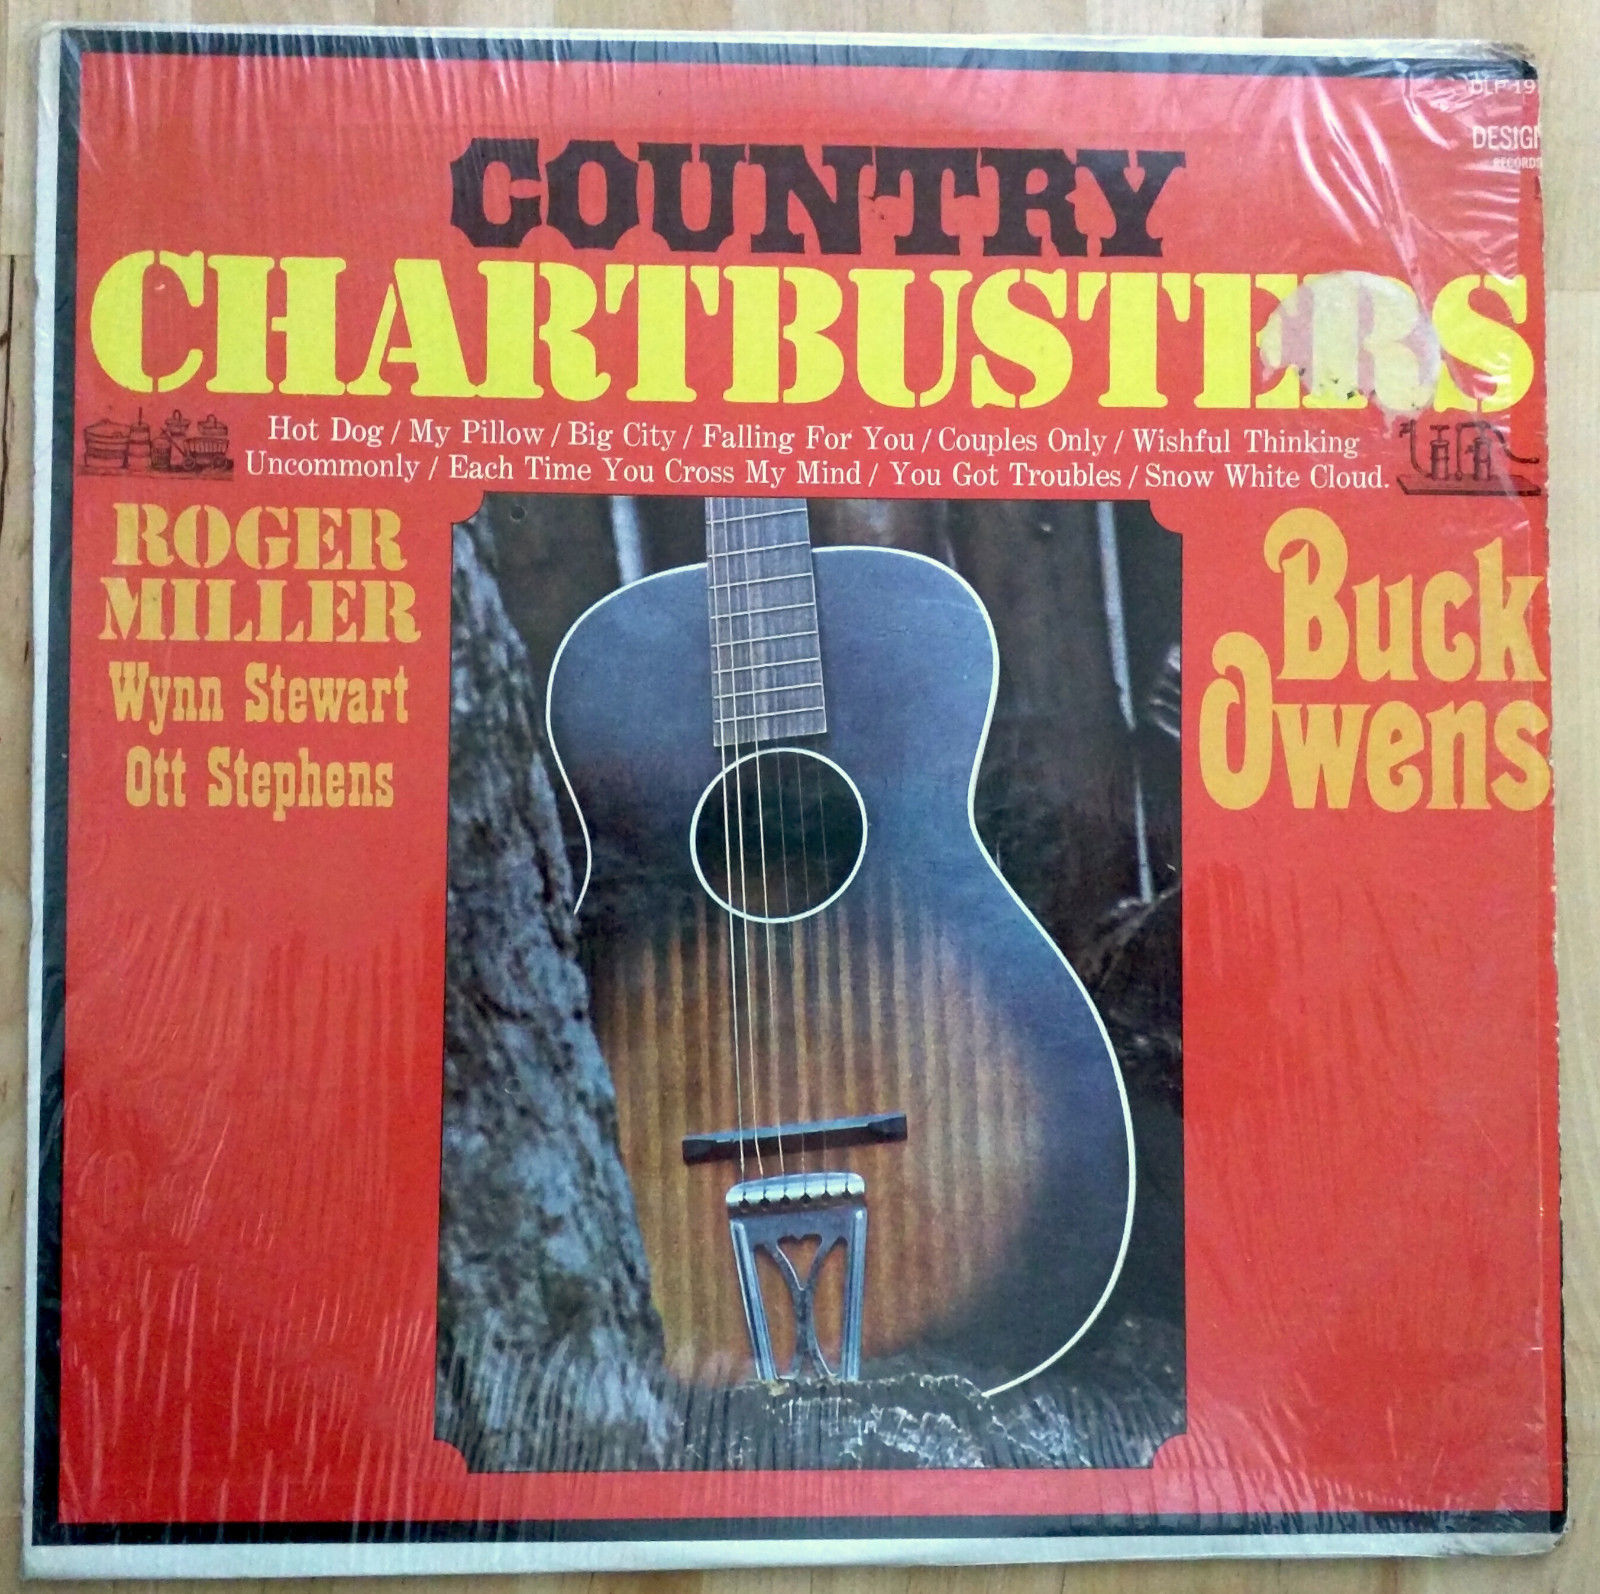 Primary image for Country Chartbusters 1962 Design Record Vinyl LP Album DLP-197 Buck Owens Shrink